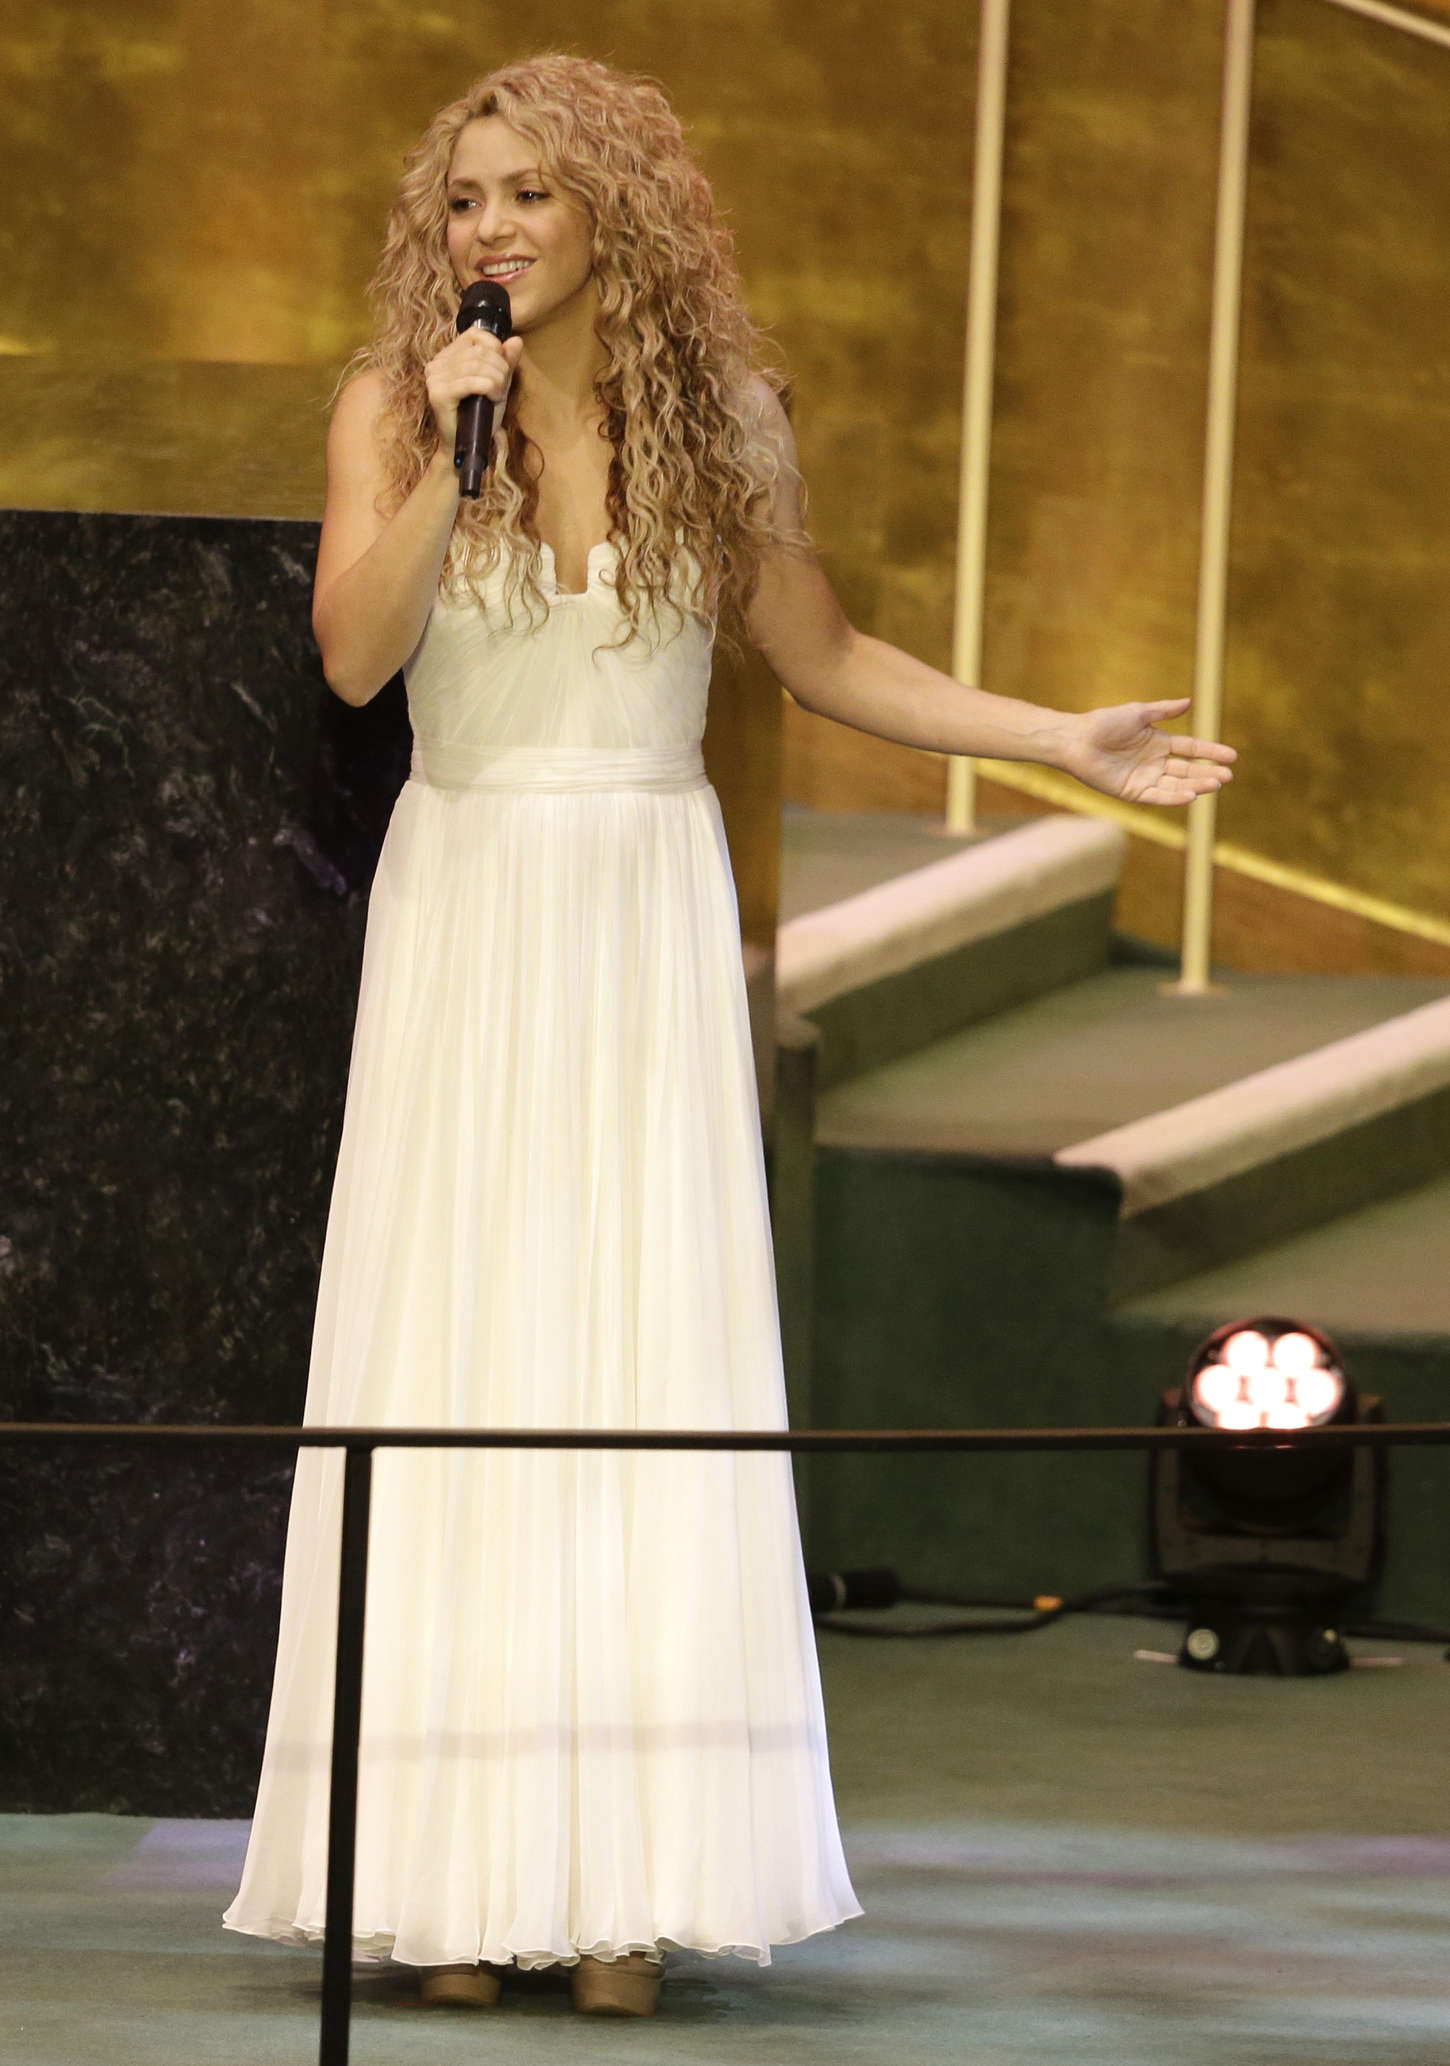 Shakira - Performs at the 2015 Sustainable Development Summit in NY